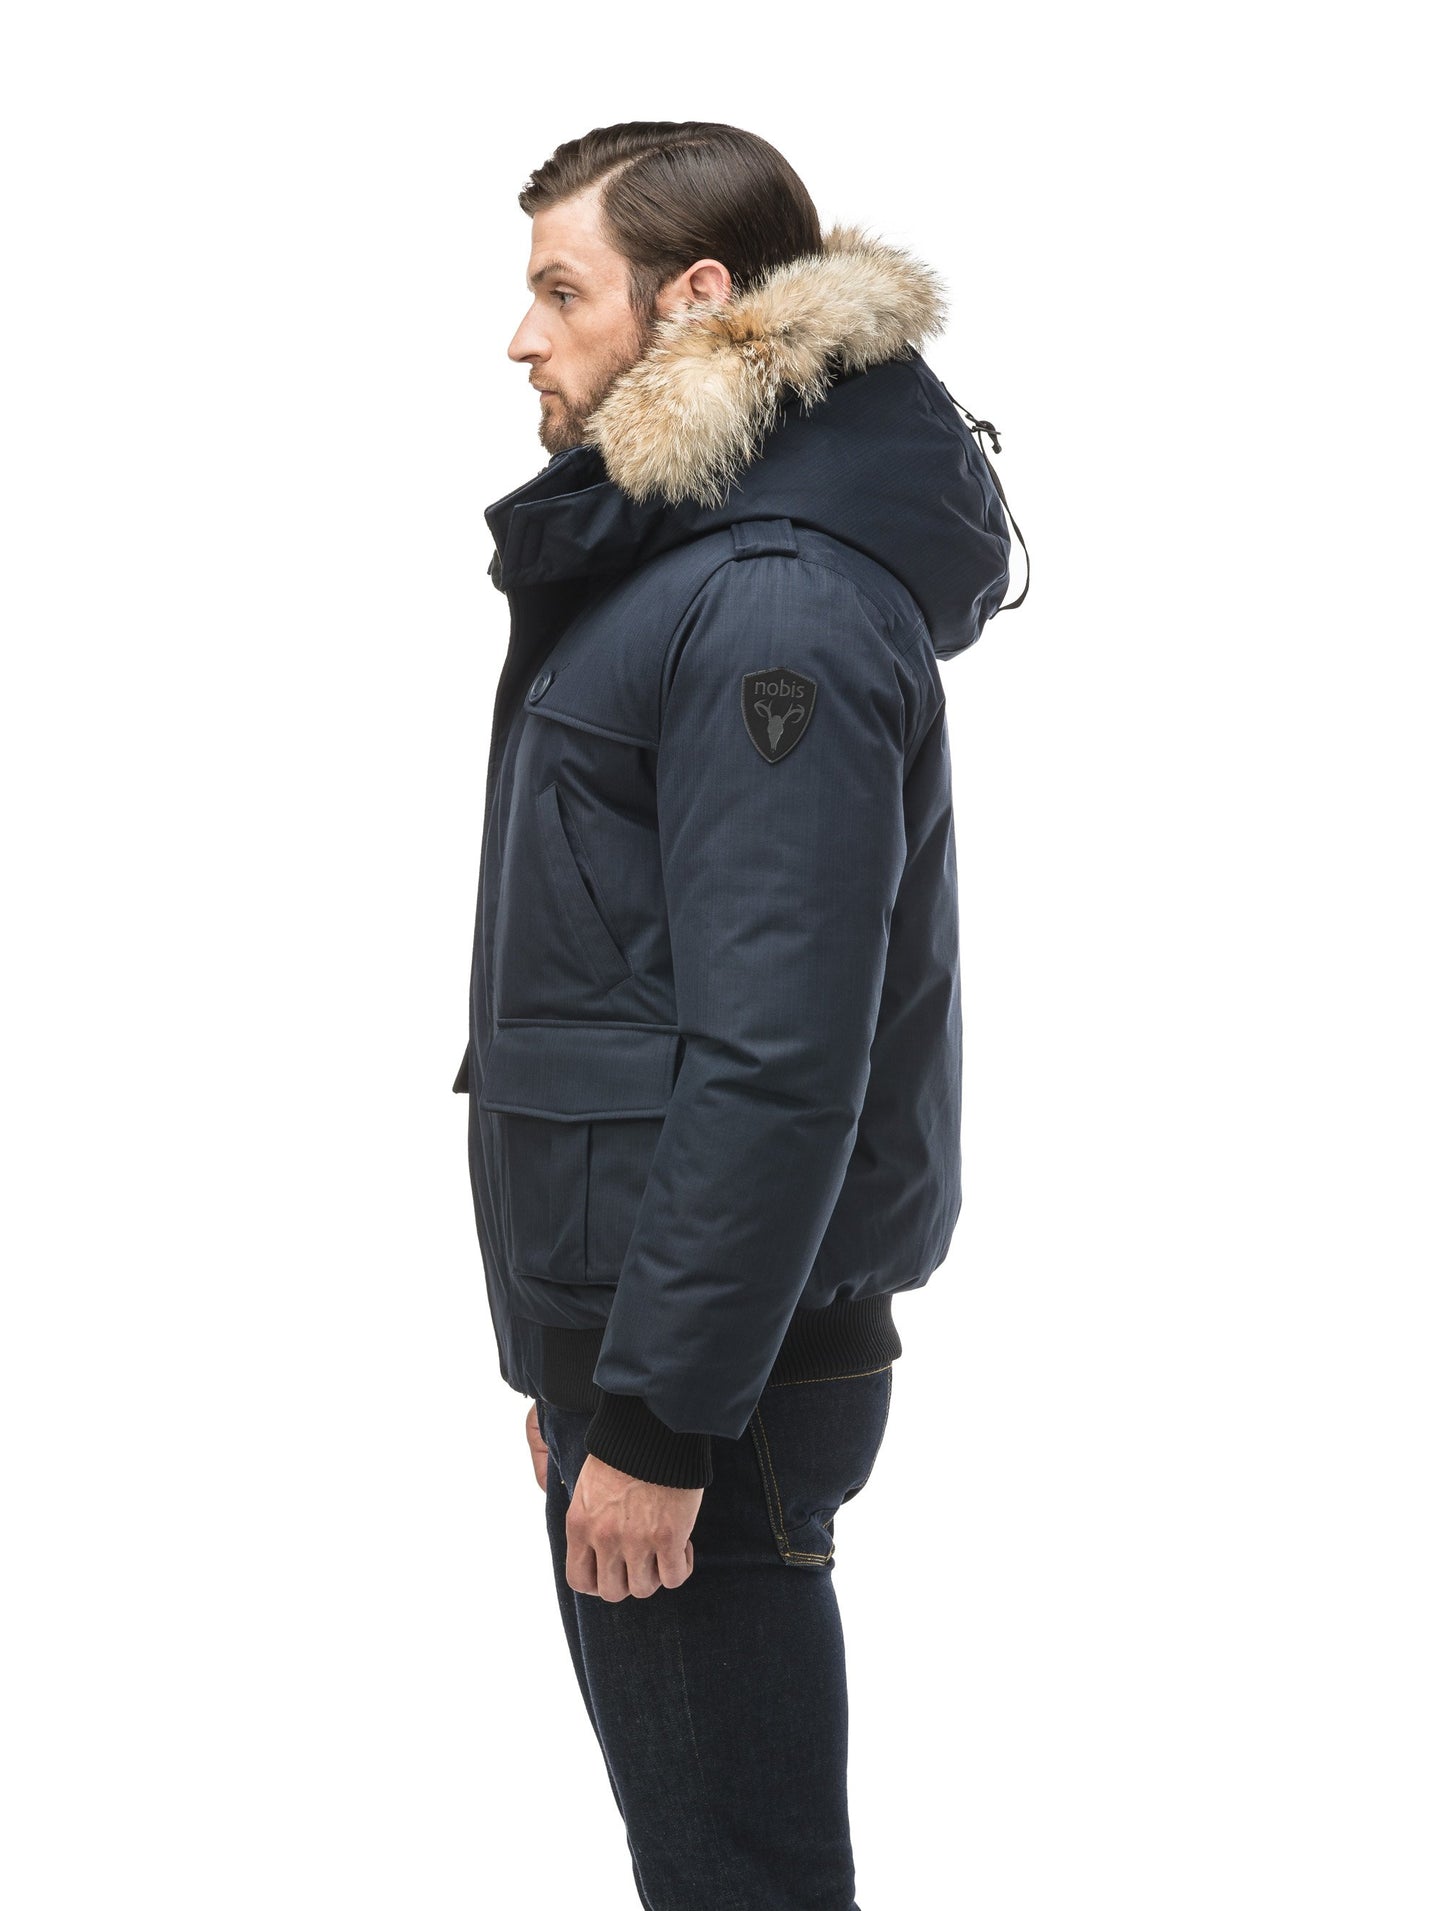 Men's down filled bomber that sits just above the hips with a completely removable hood thatÃƒÆ’Ã¢â‚¬Å¡Ãƒâ€šÃ‚Â¡s windproof, waterproof, and breathable in CH Navy